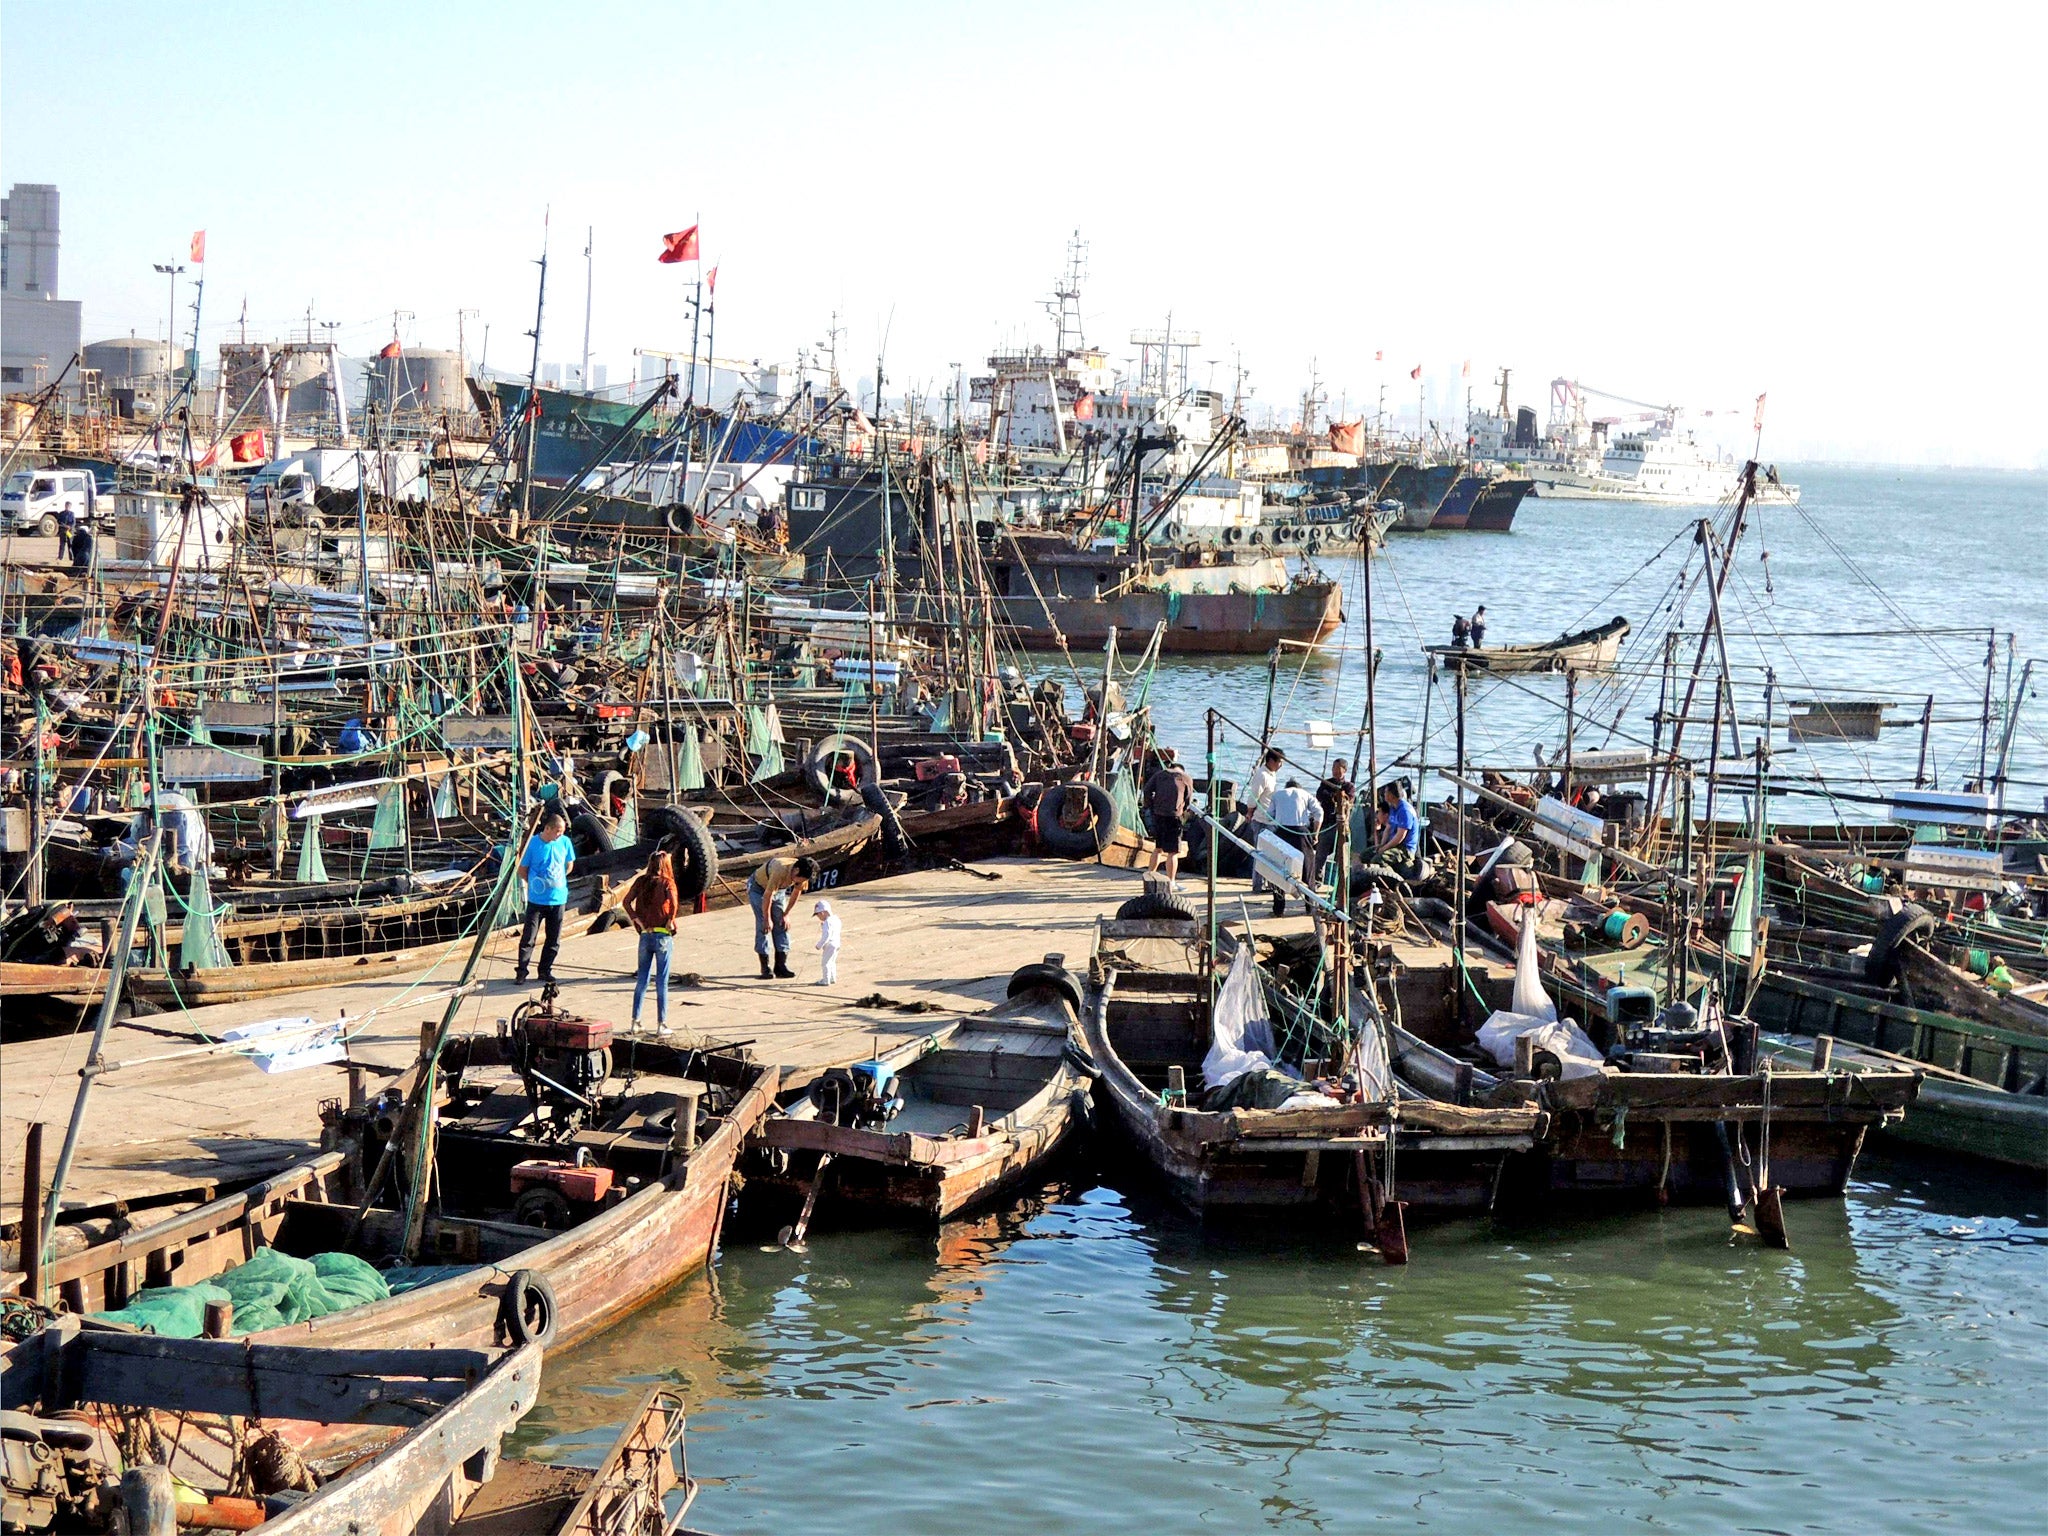 The fishing village at Dalian Bay, where a Chinese fishing boat was detained